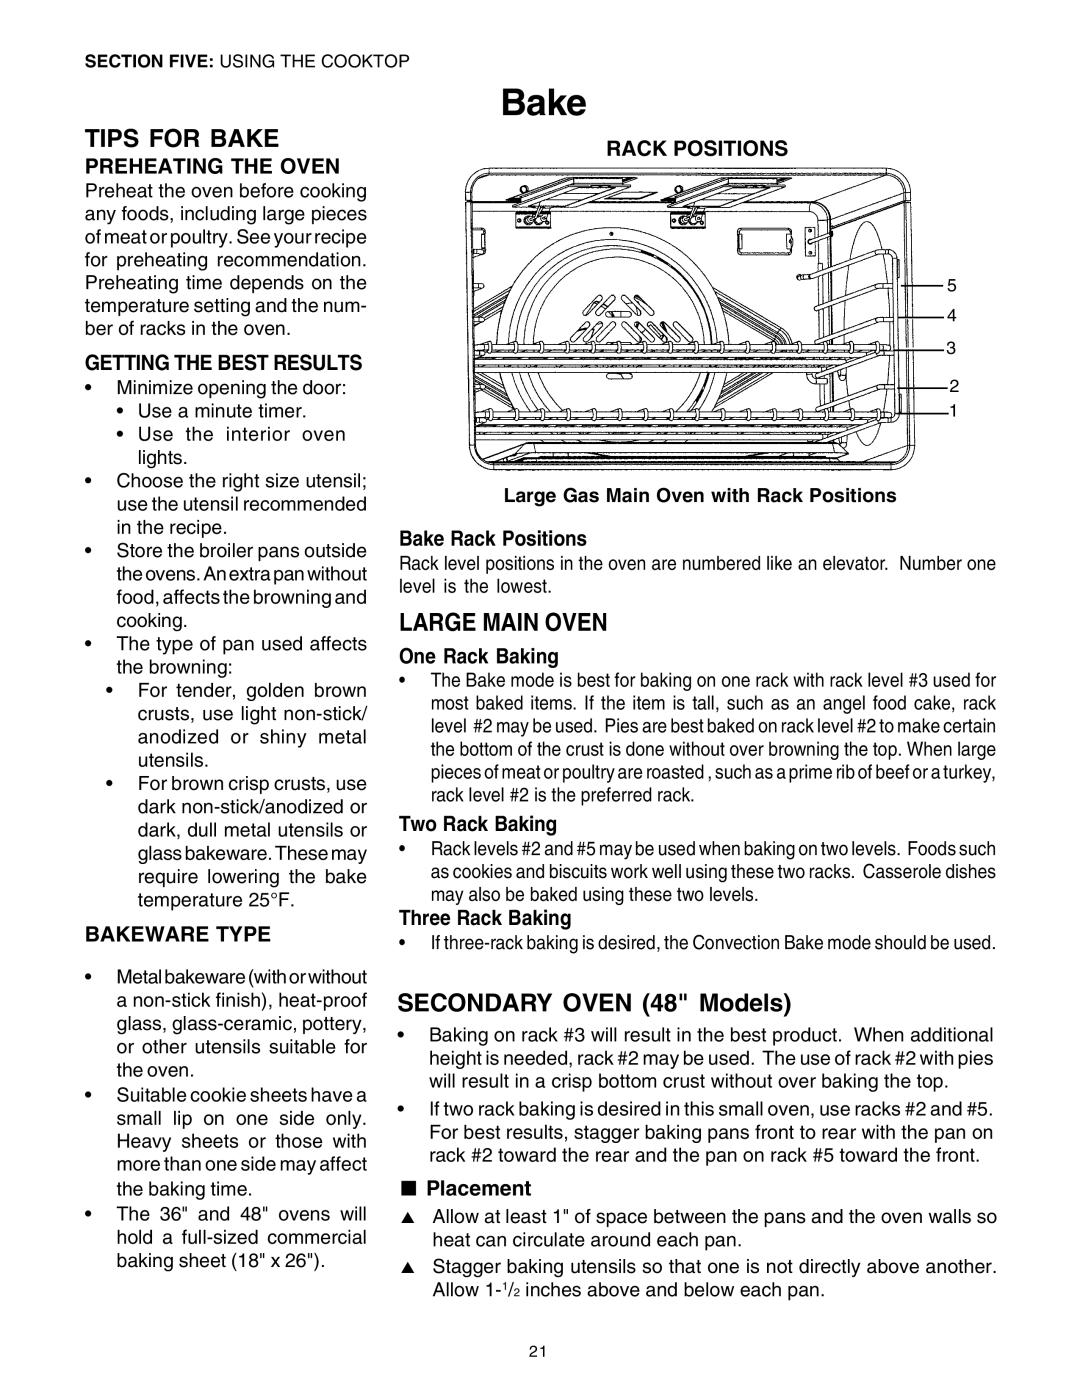 Thermador PG30 Tips For Bake, Large Main Oven, SECONDARY OVEN 48 Models, Preheating The Oven, Bakeware Type, Placement 